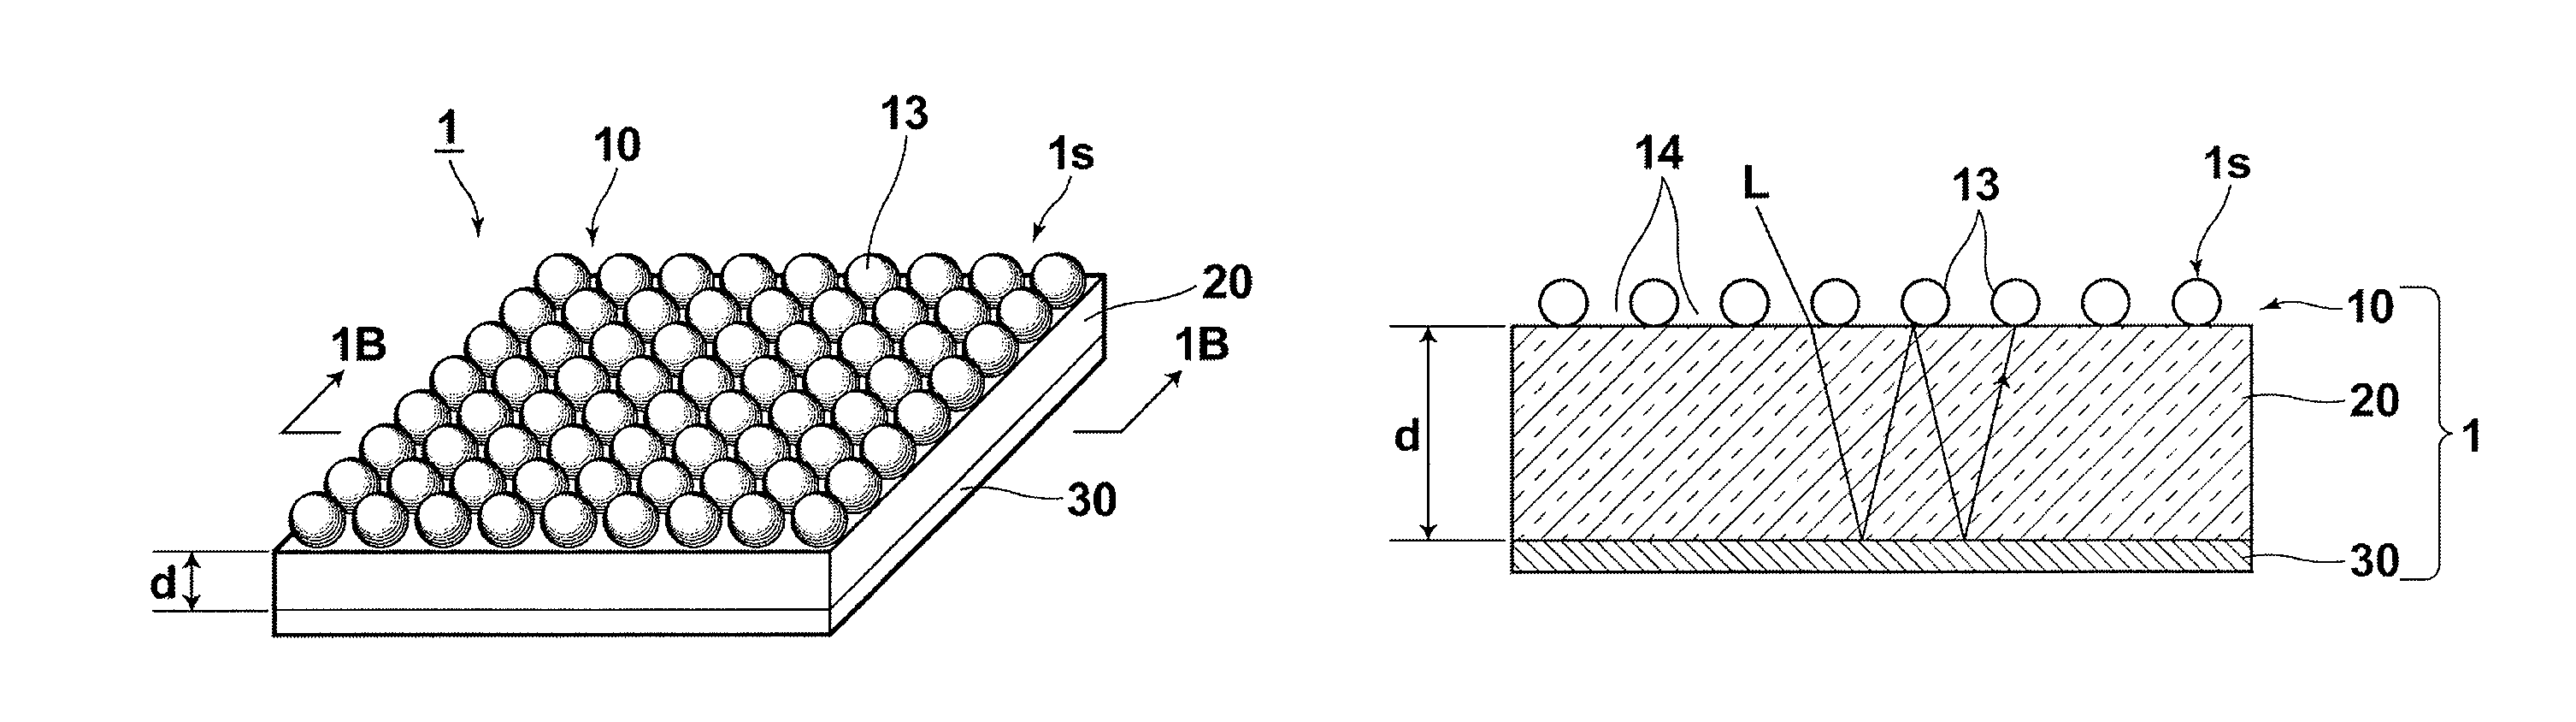 Substrate for mass spectrometry and mass spectrometry method